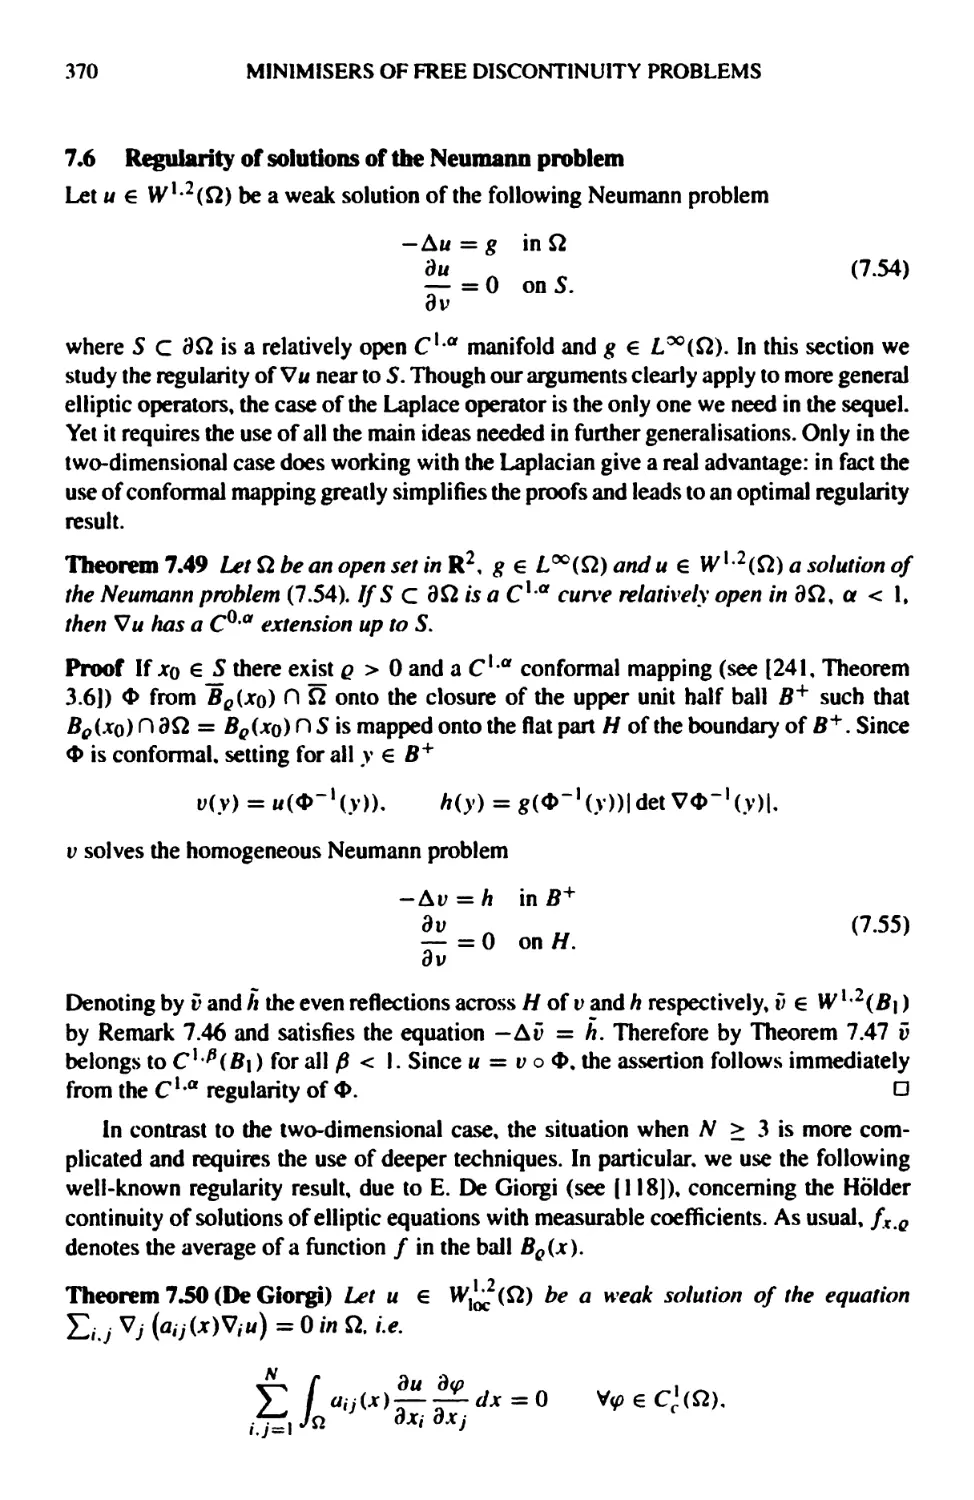 7.6 Regularity of solutions of the Neumann problem